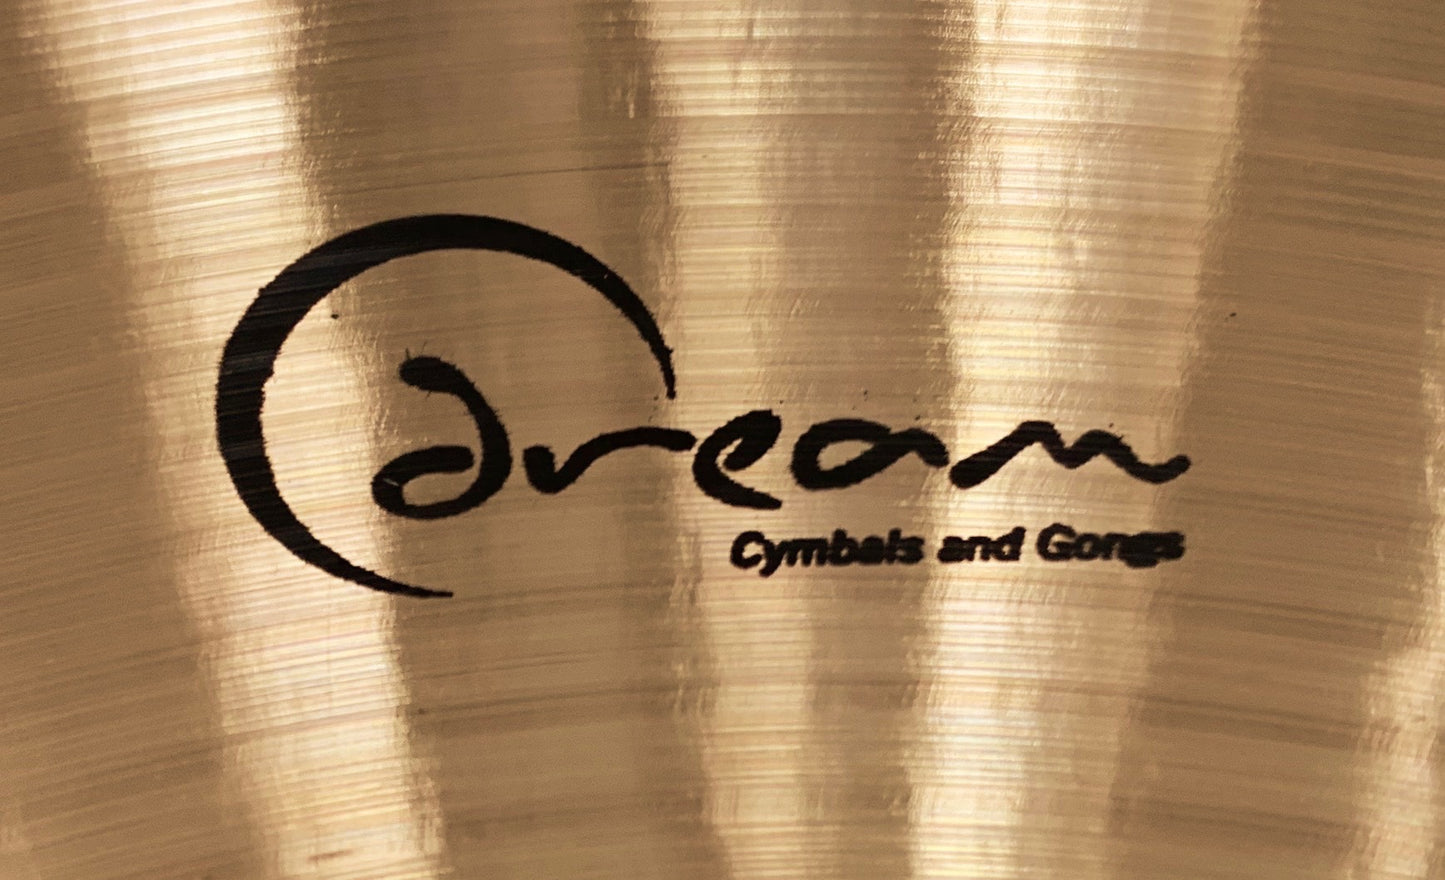 Dream Cymbals IGNCP4 Ignition Series 4 Piece Cymbal Pack & Bag